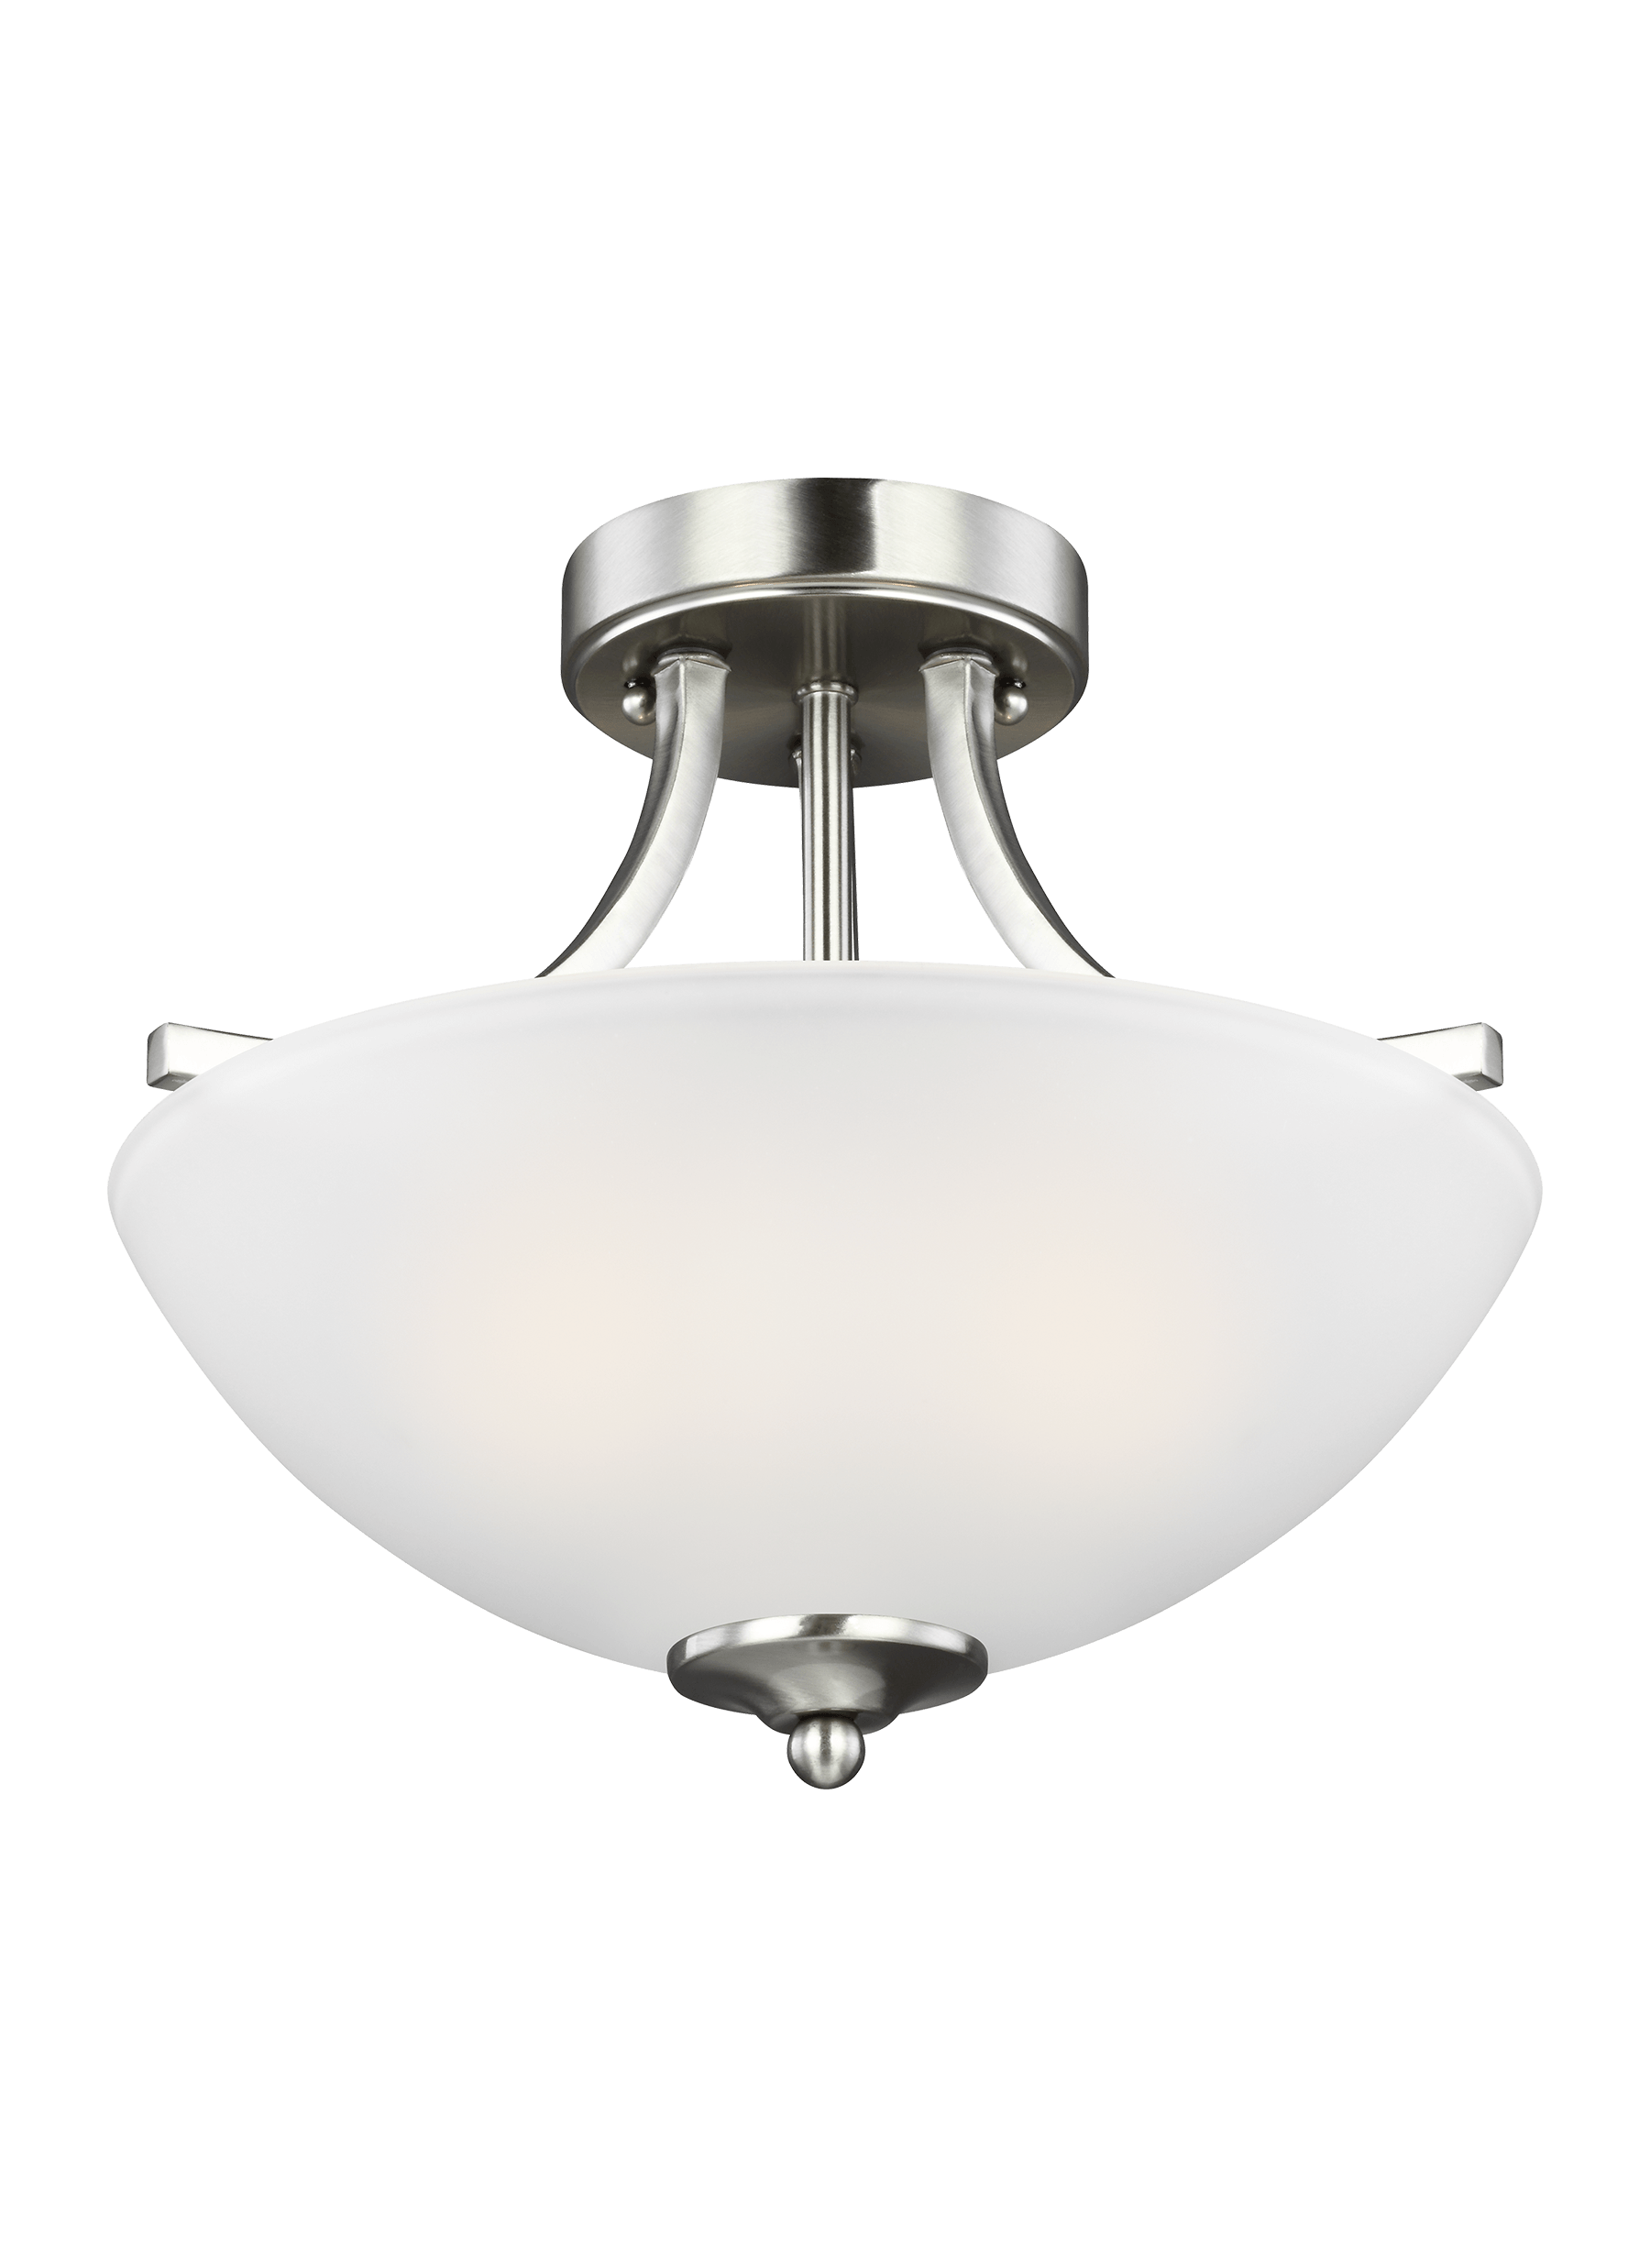 Geary Small Two Light Semi-Flush Convertible LED Pendant - Brushed Nickel Ceiling Sea Gull Lighting 